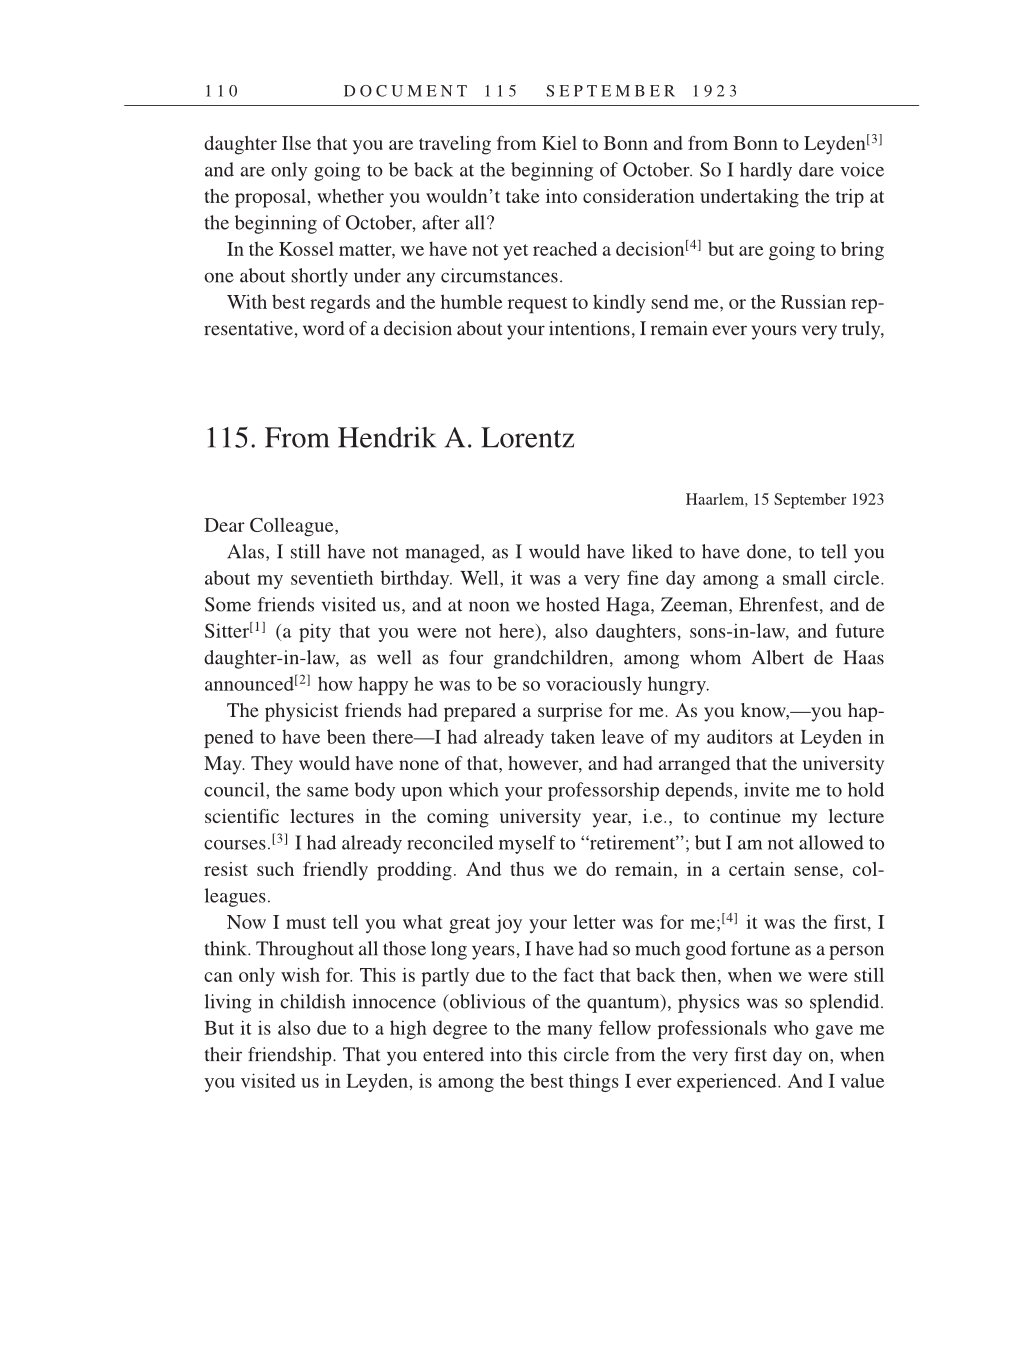 Volume 14: The Berlin Years: Writings & Correspondence, April 1923-May 1925 (English Translation Supplement) page 110